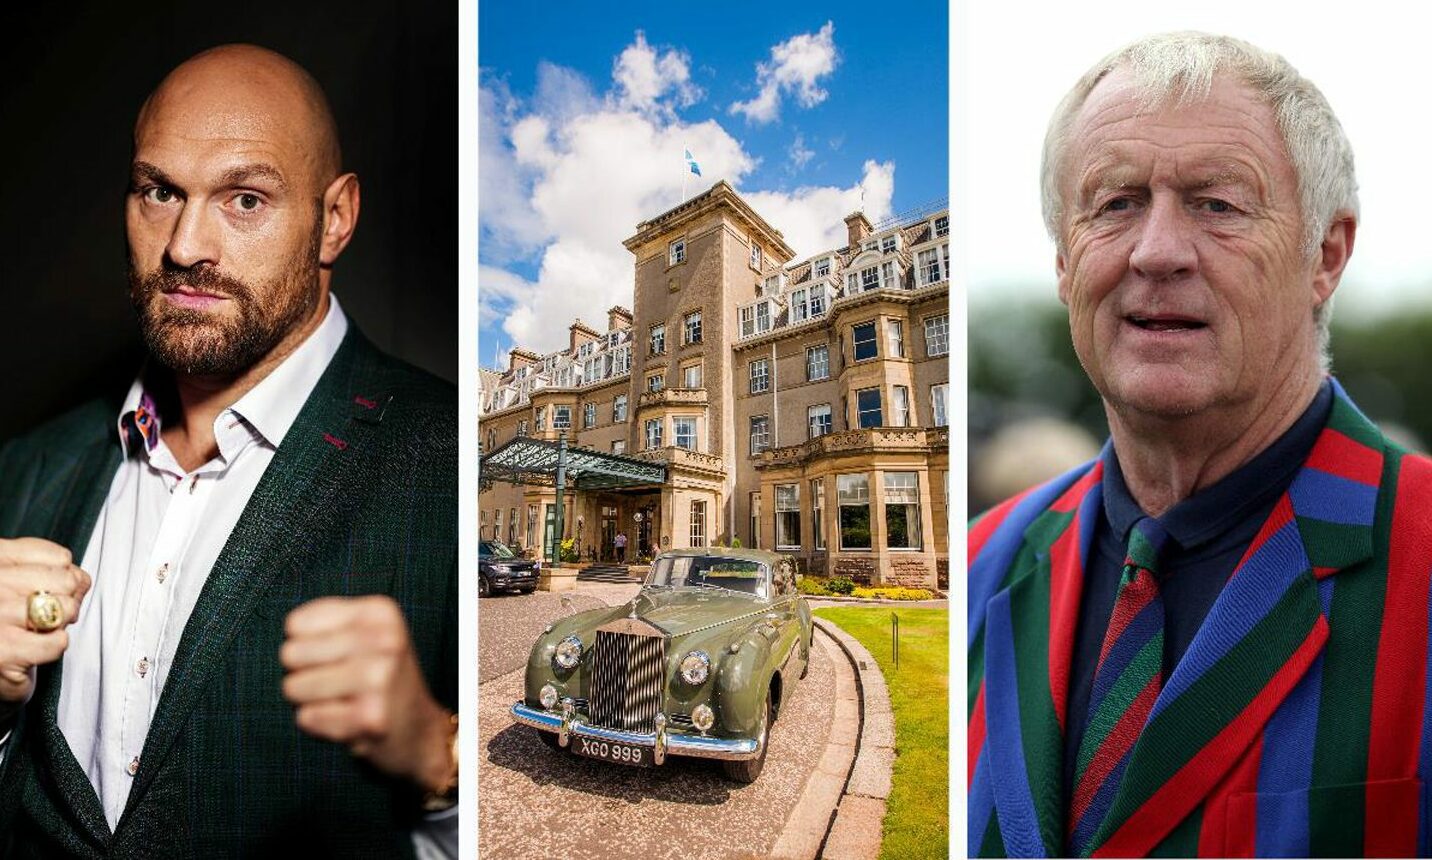 Tyson Fury claims to have argued with Chris Tarrant at Gleneagles